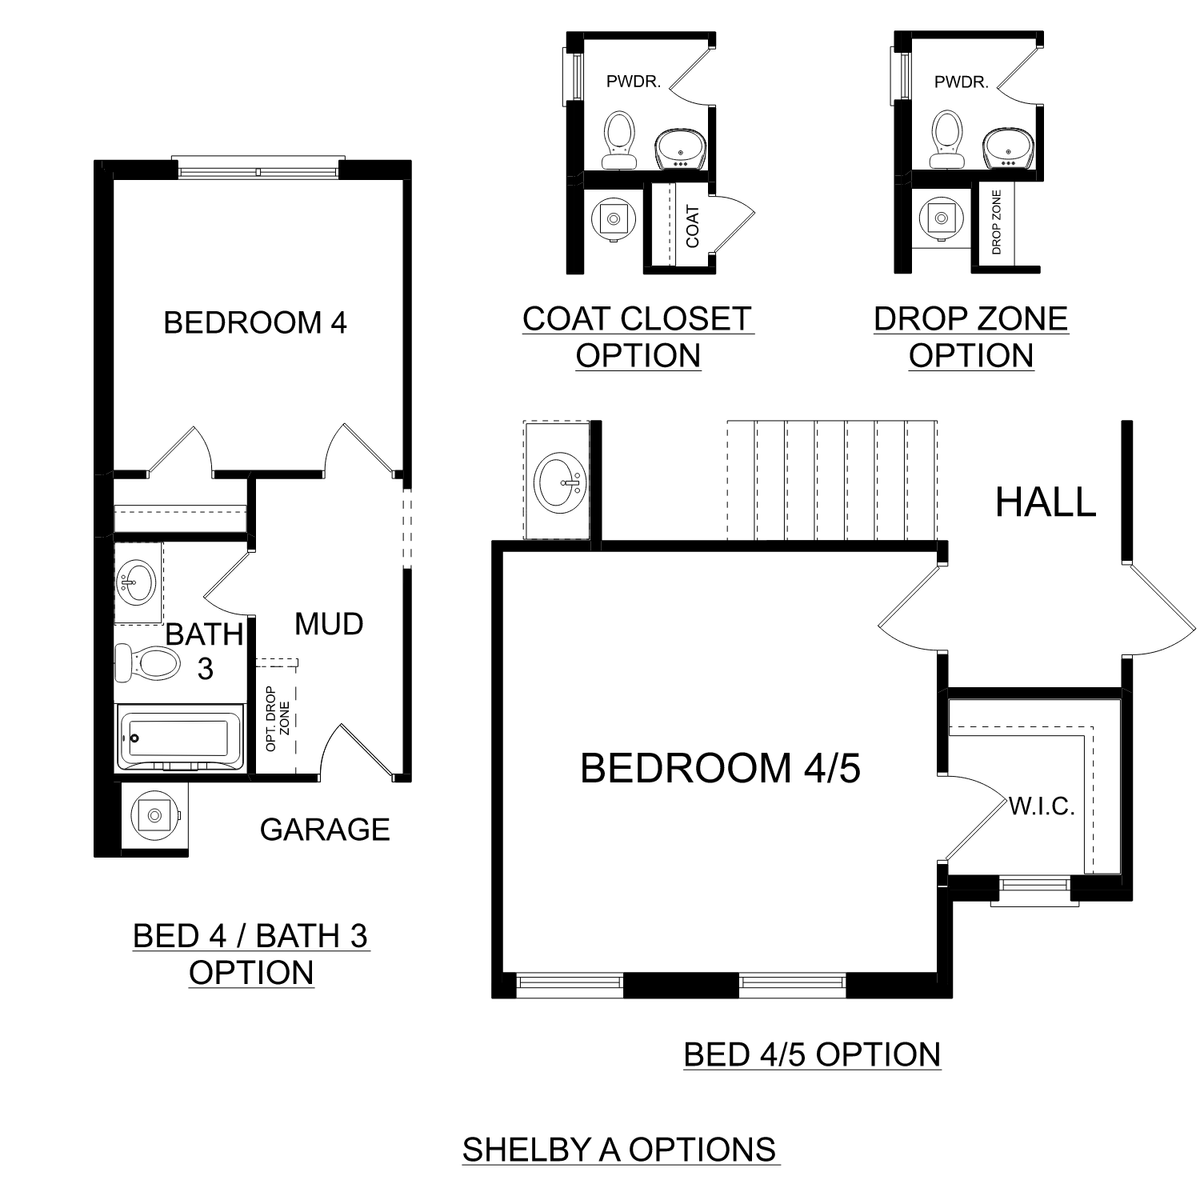 3 - The Shelby A buildable floor plan layout in Davidson Homes' Williams Pointe community.